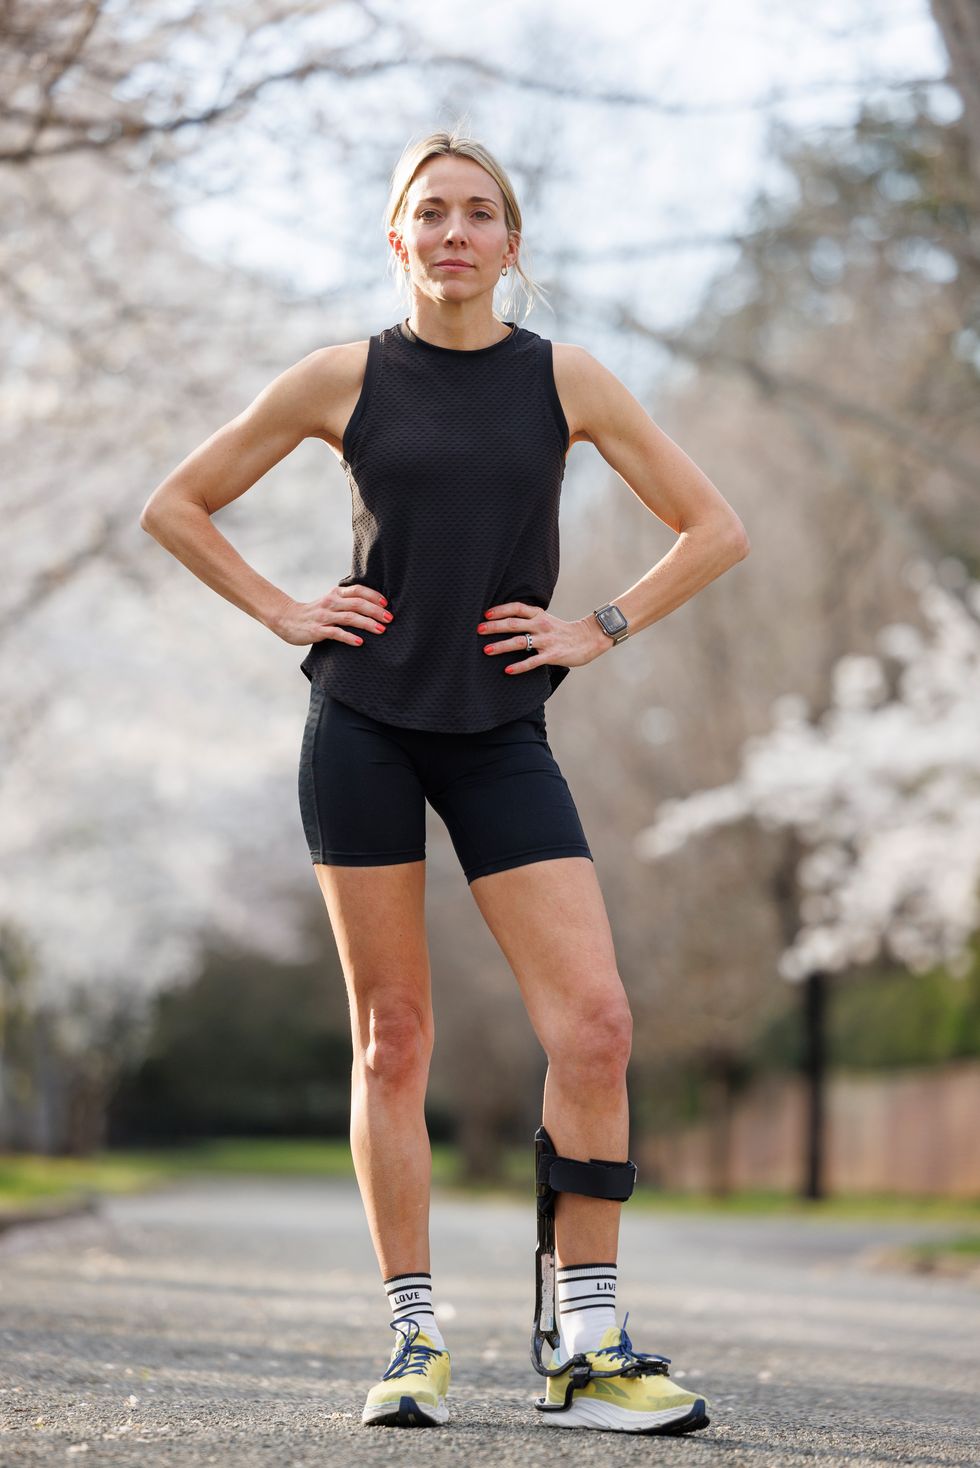 a woman poses for a portrait wearing running clothes